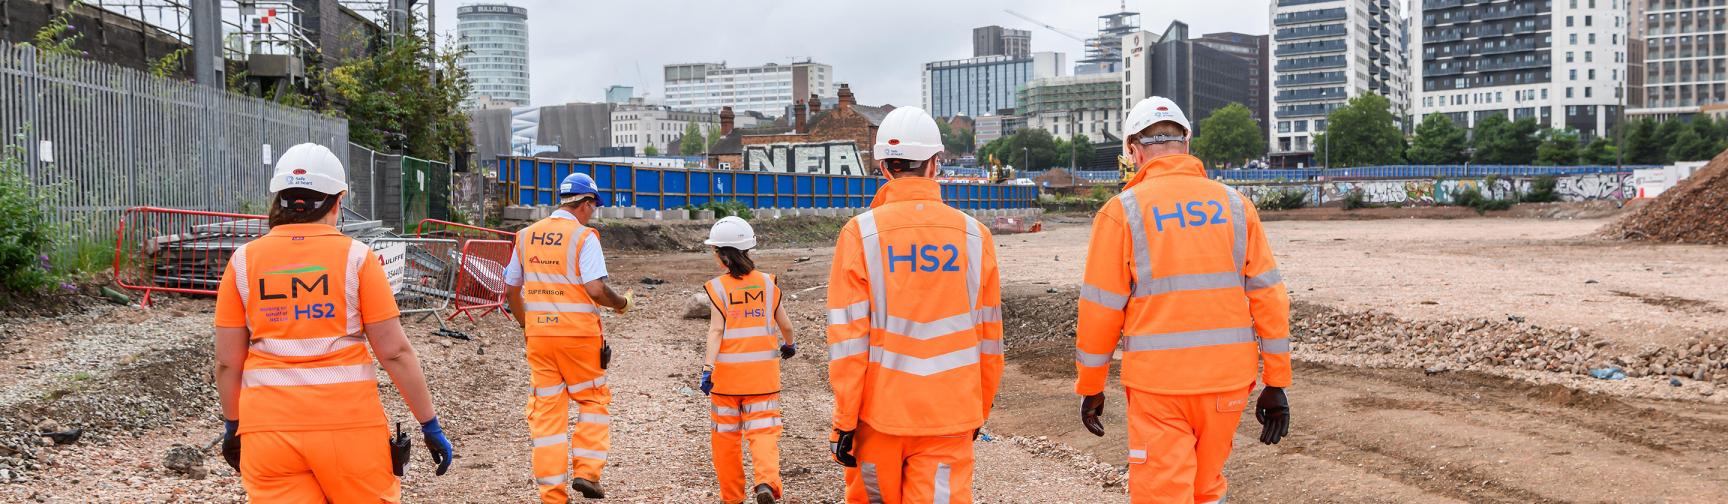 HS2 workers on the construction site.